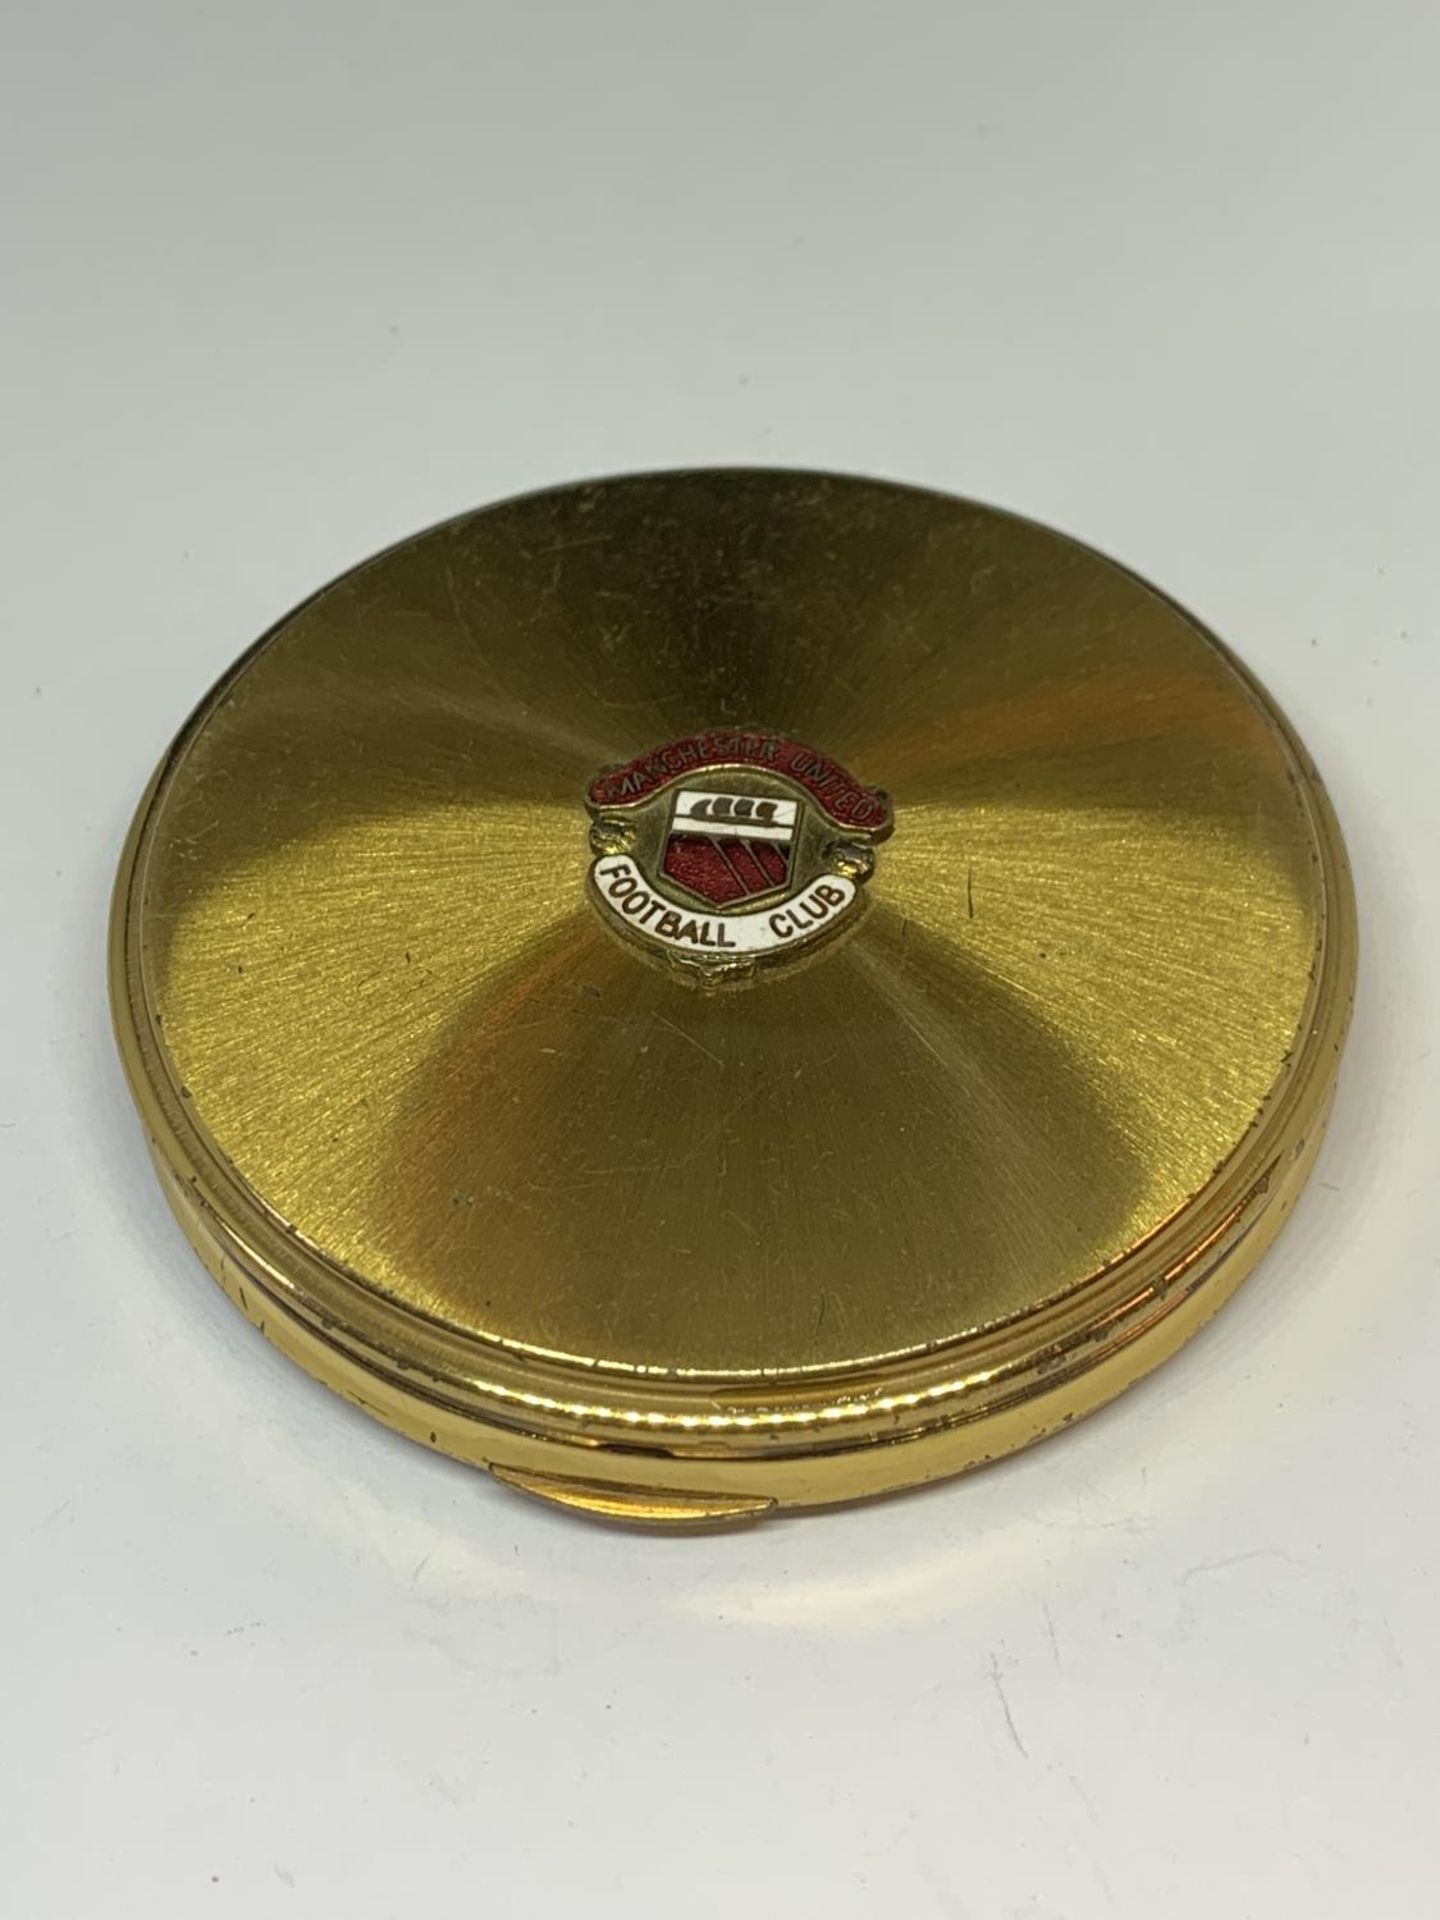 A MANCHESTER UNITED POWDER COMPACT